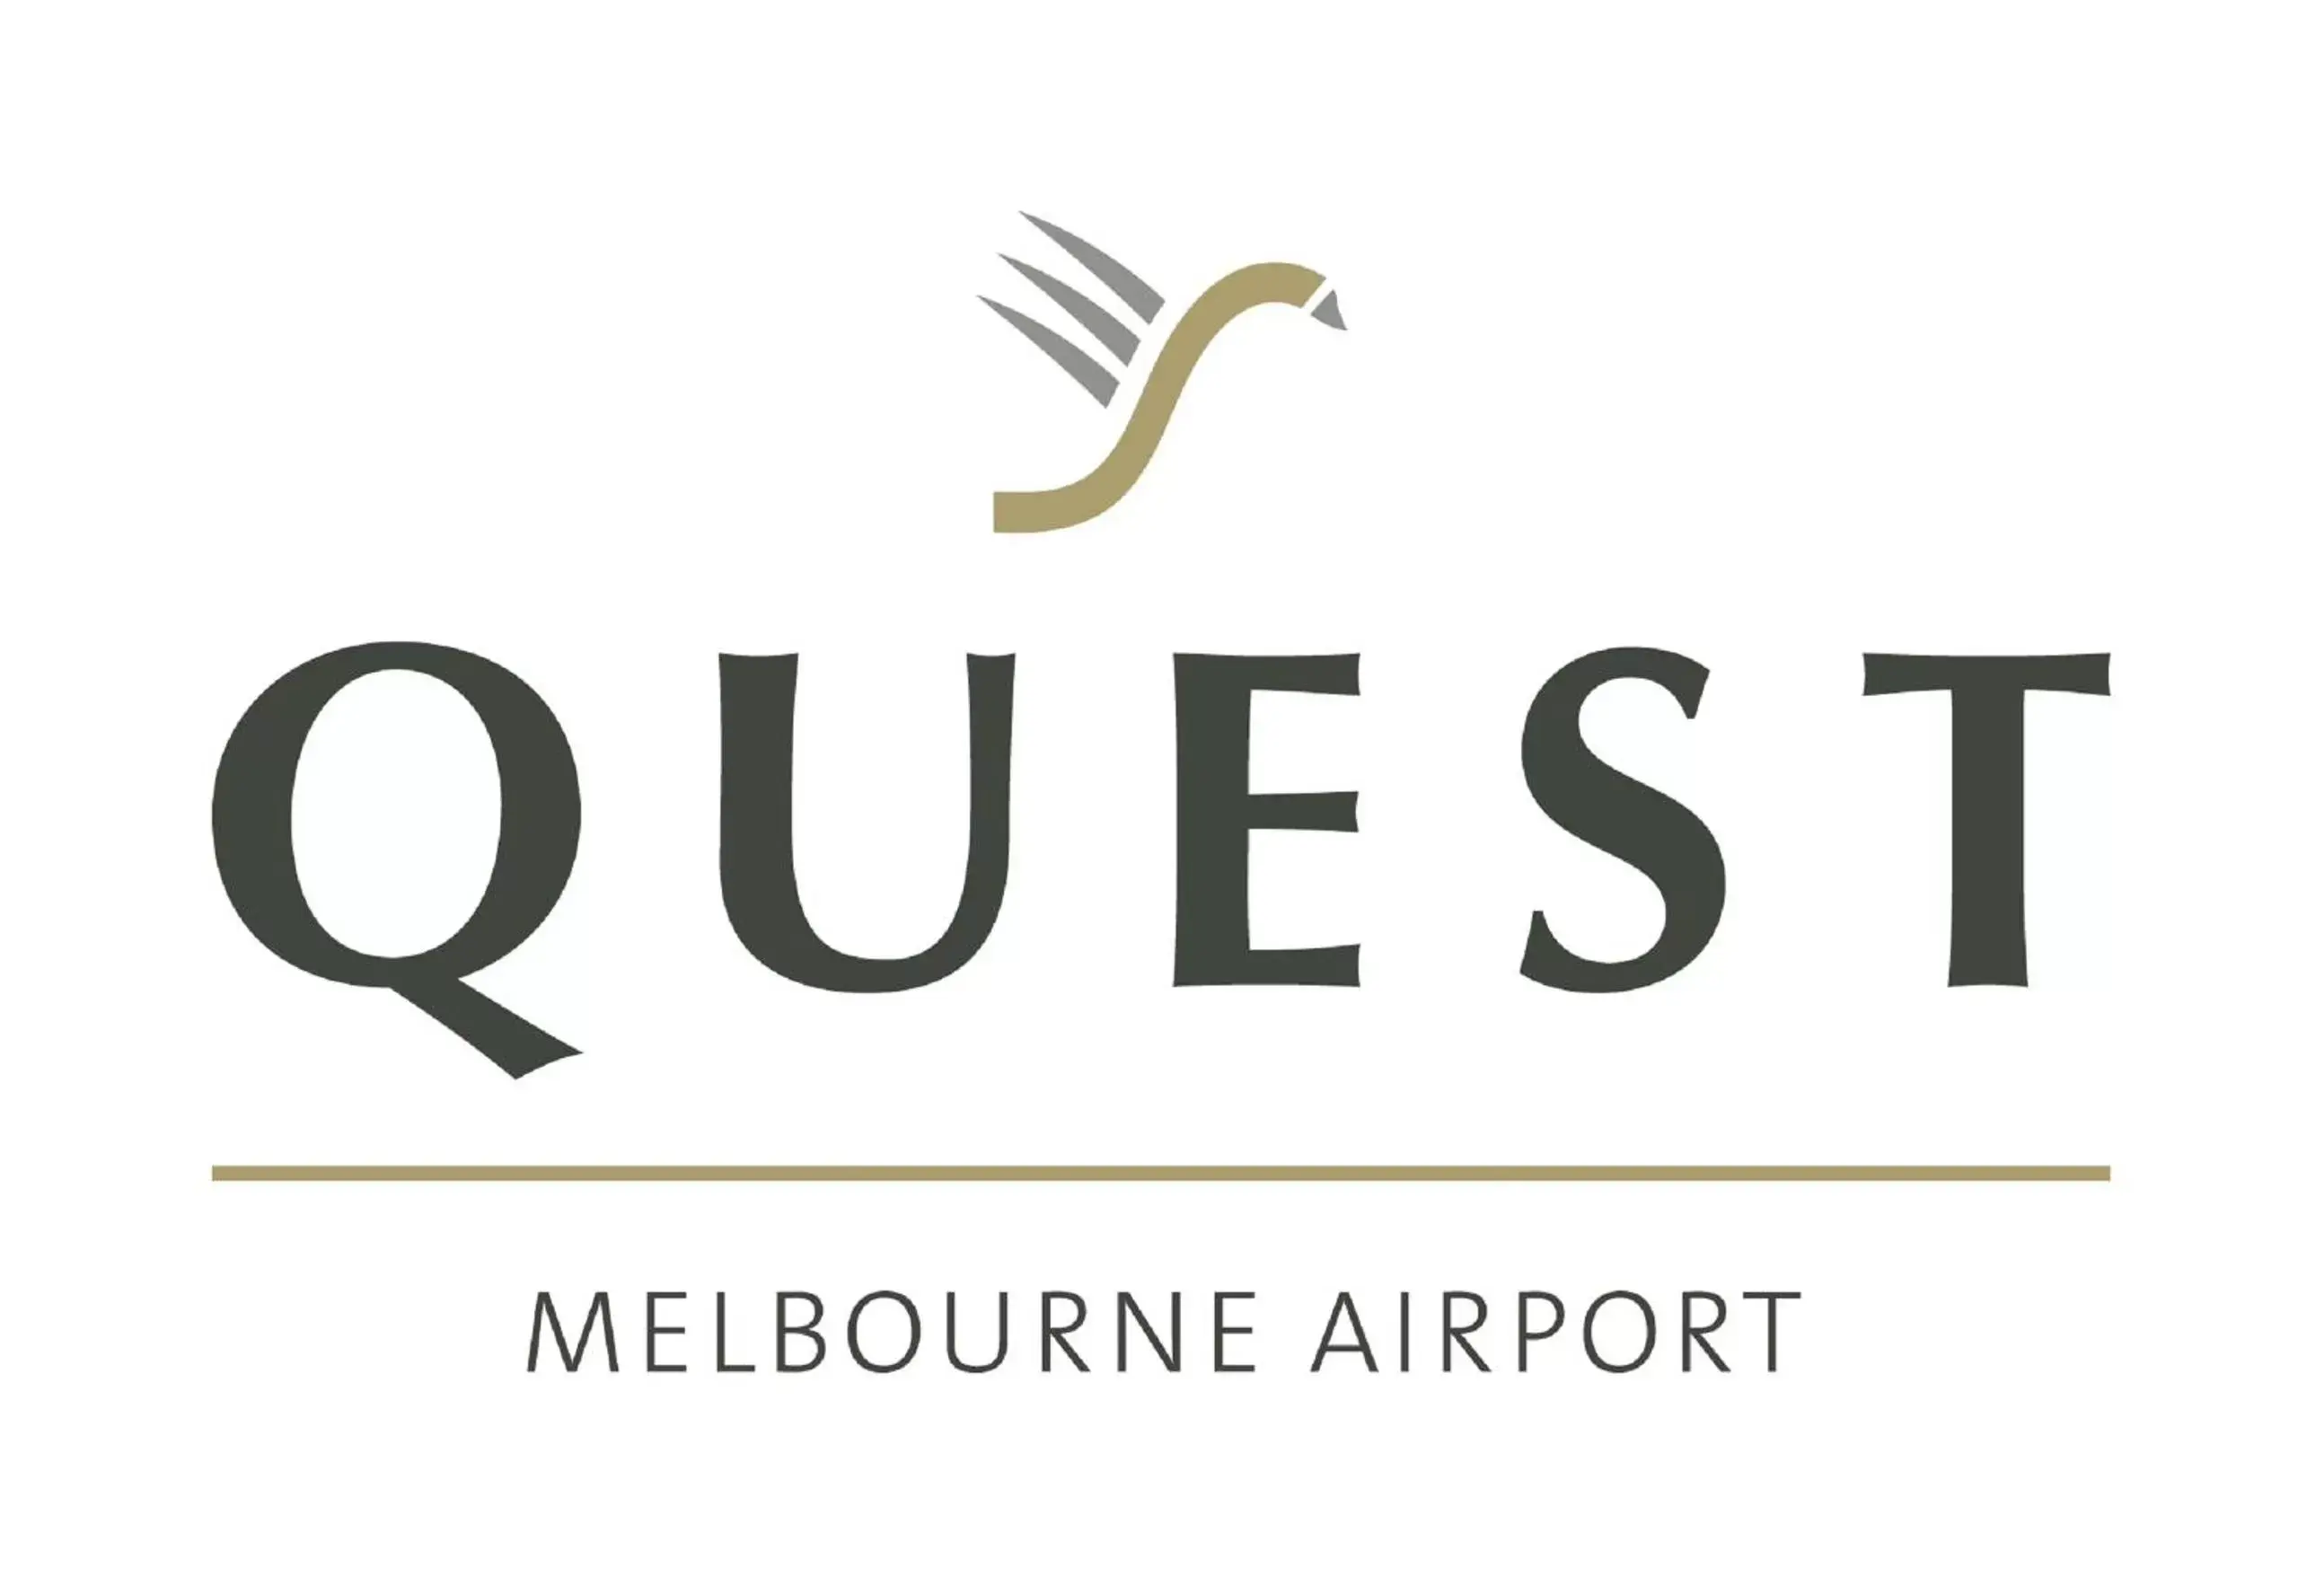 Property logo or sign in Quest Melbourne Airport